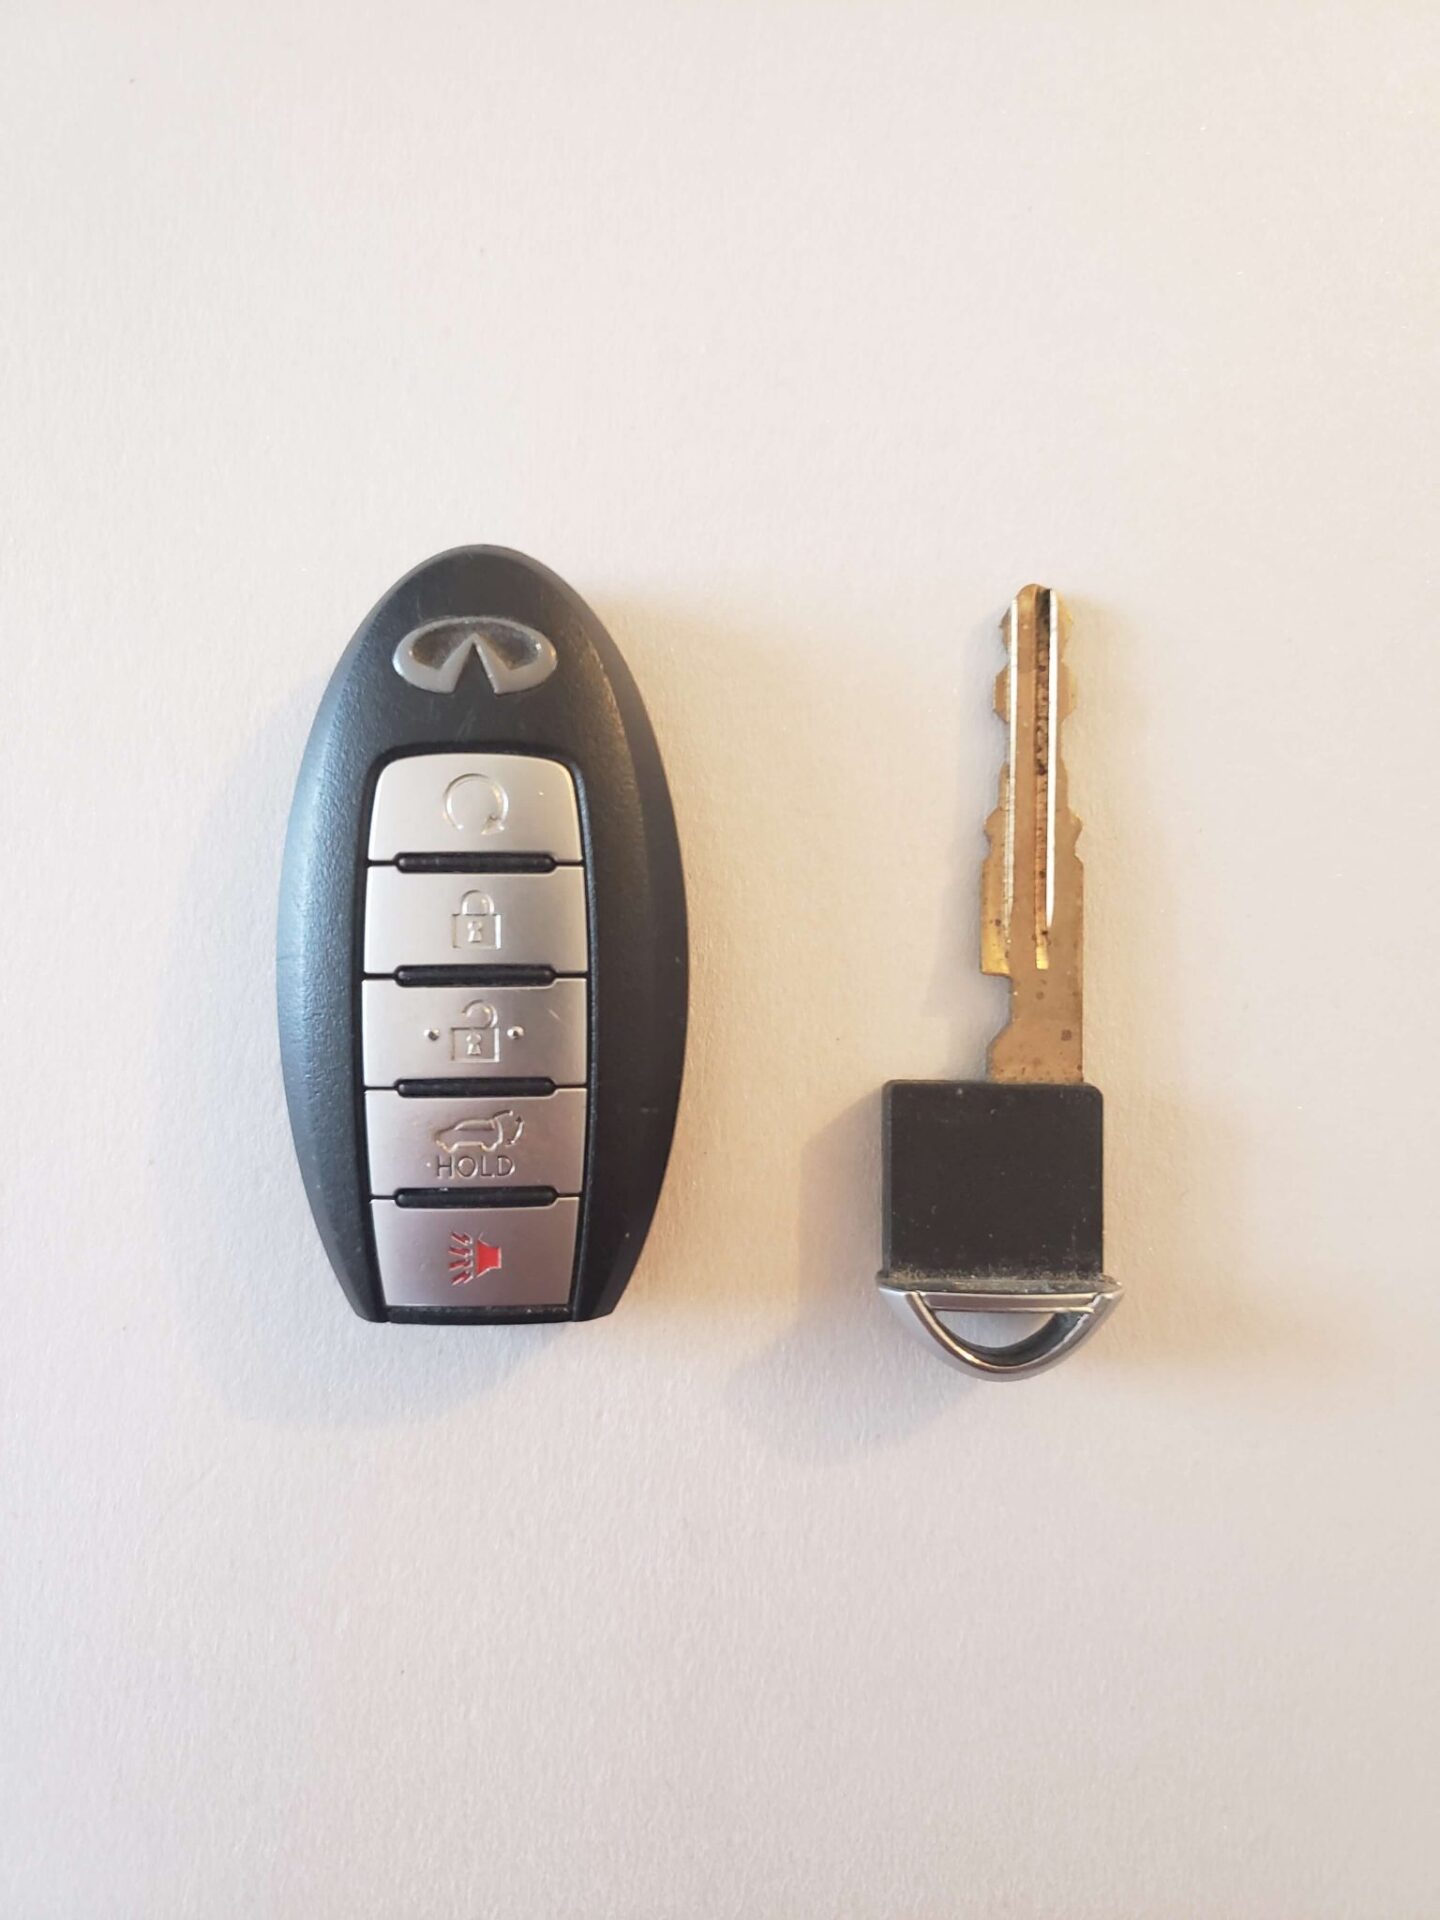 Infiniti G35 Key Replacement - What To Do, Options, Costs & More